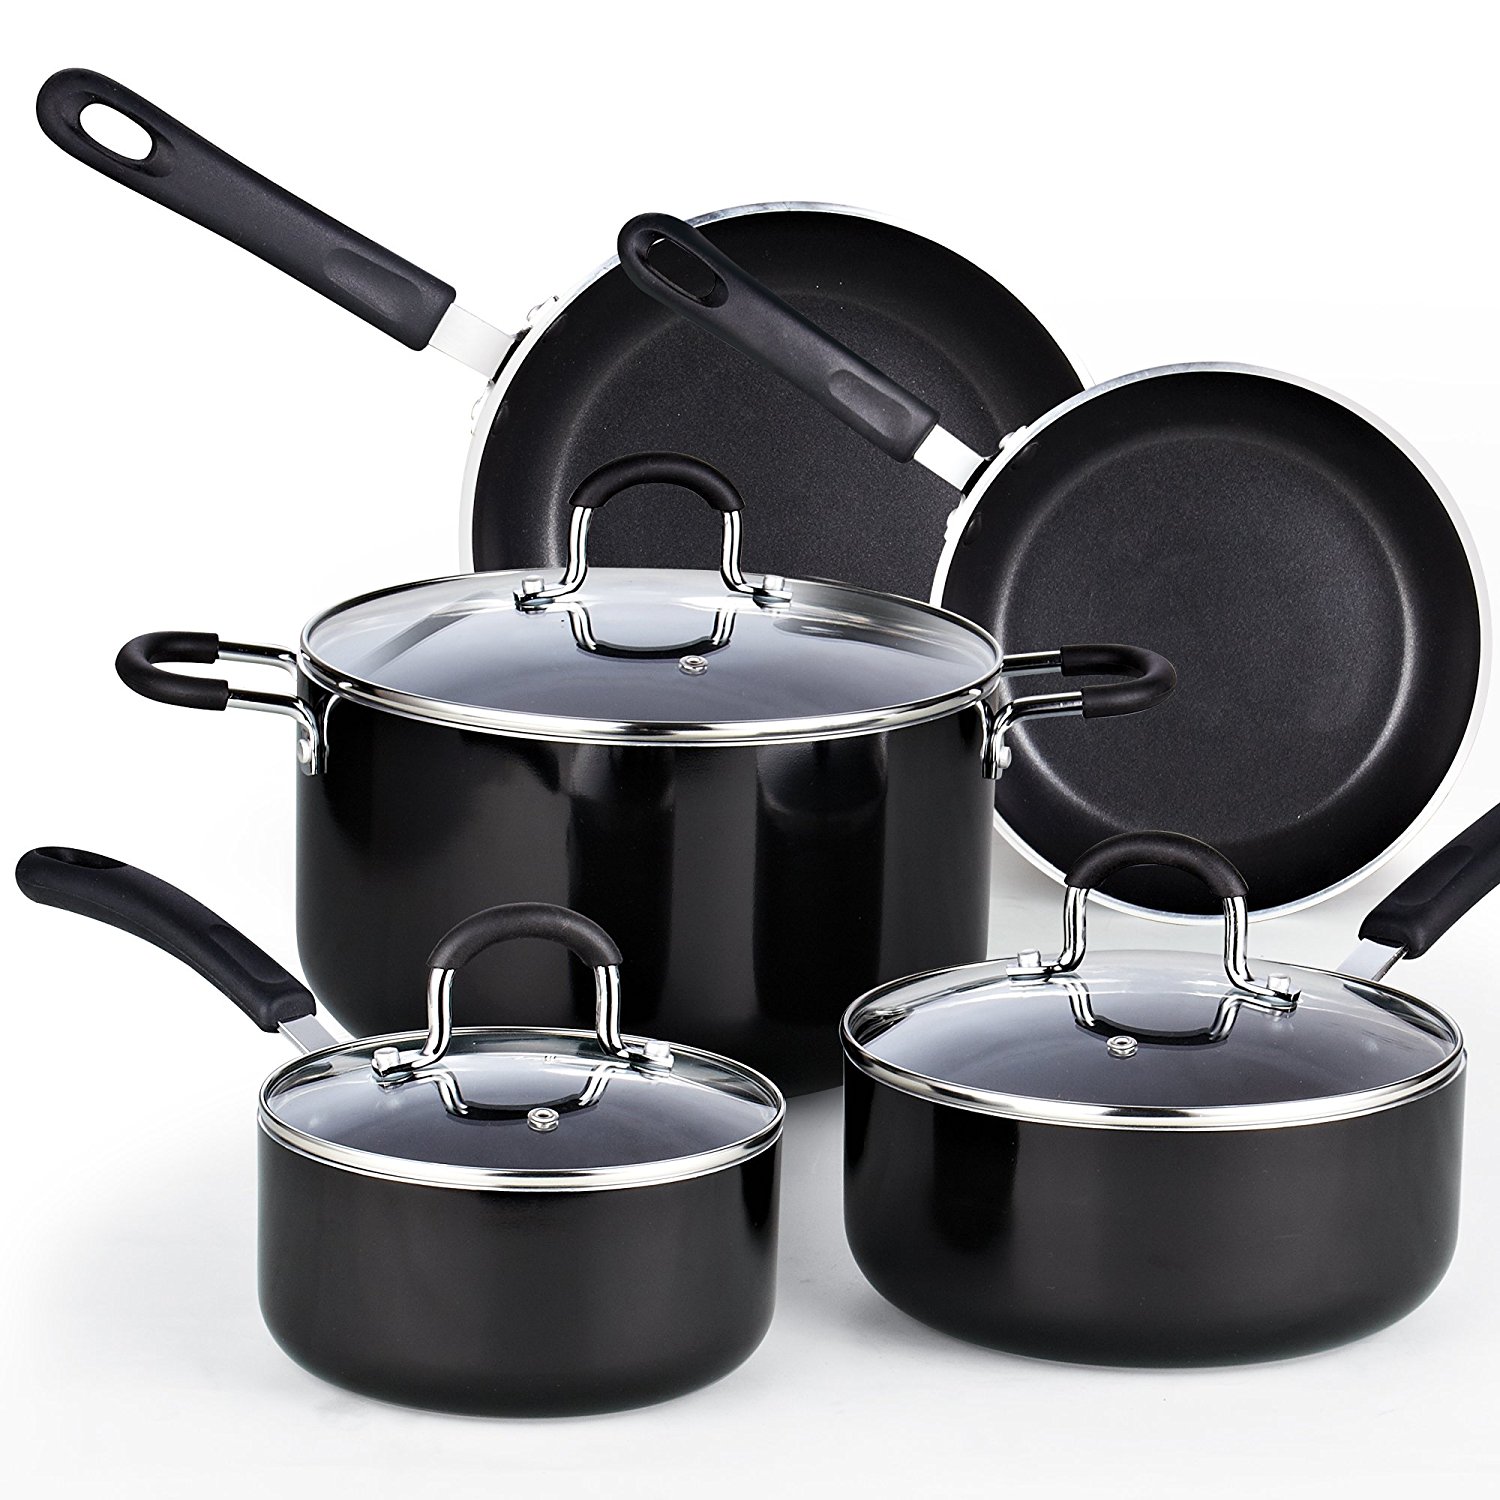 new release And best Cookware Sets discount up to 79